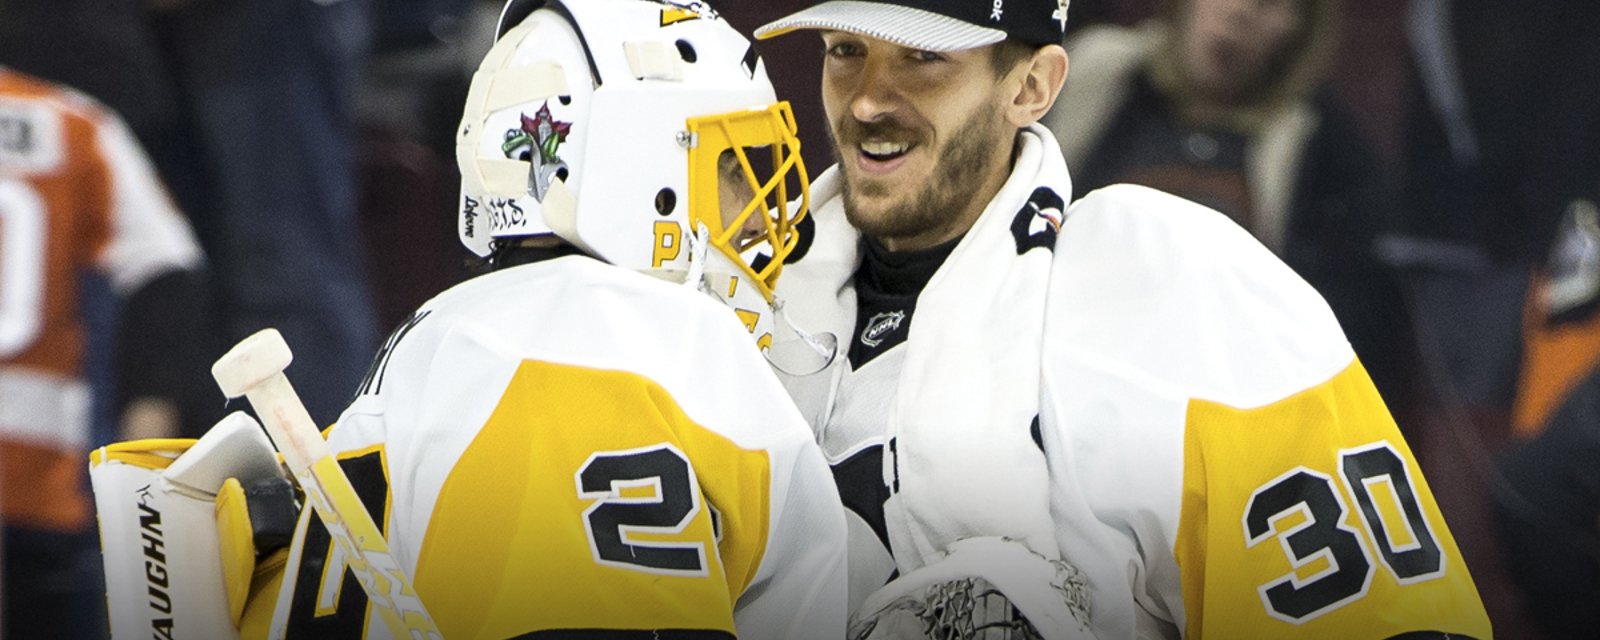 Breaking: Murray and Fleury to square off tonight!